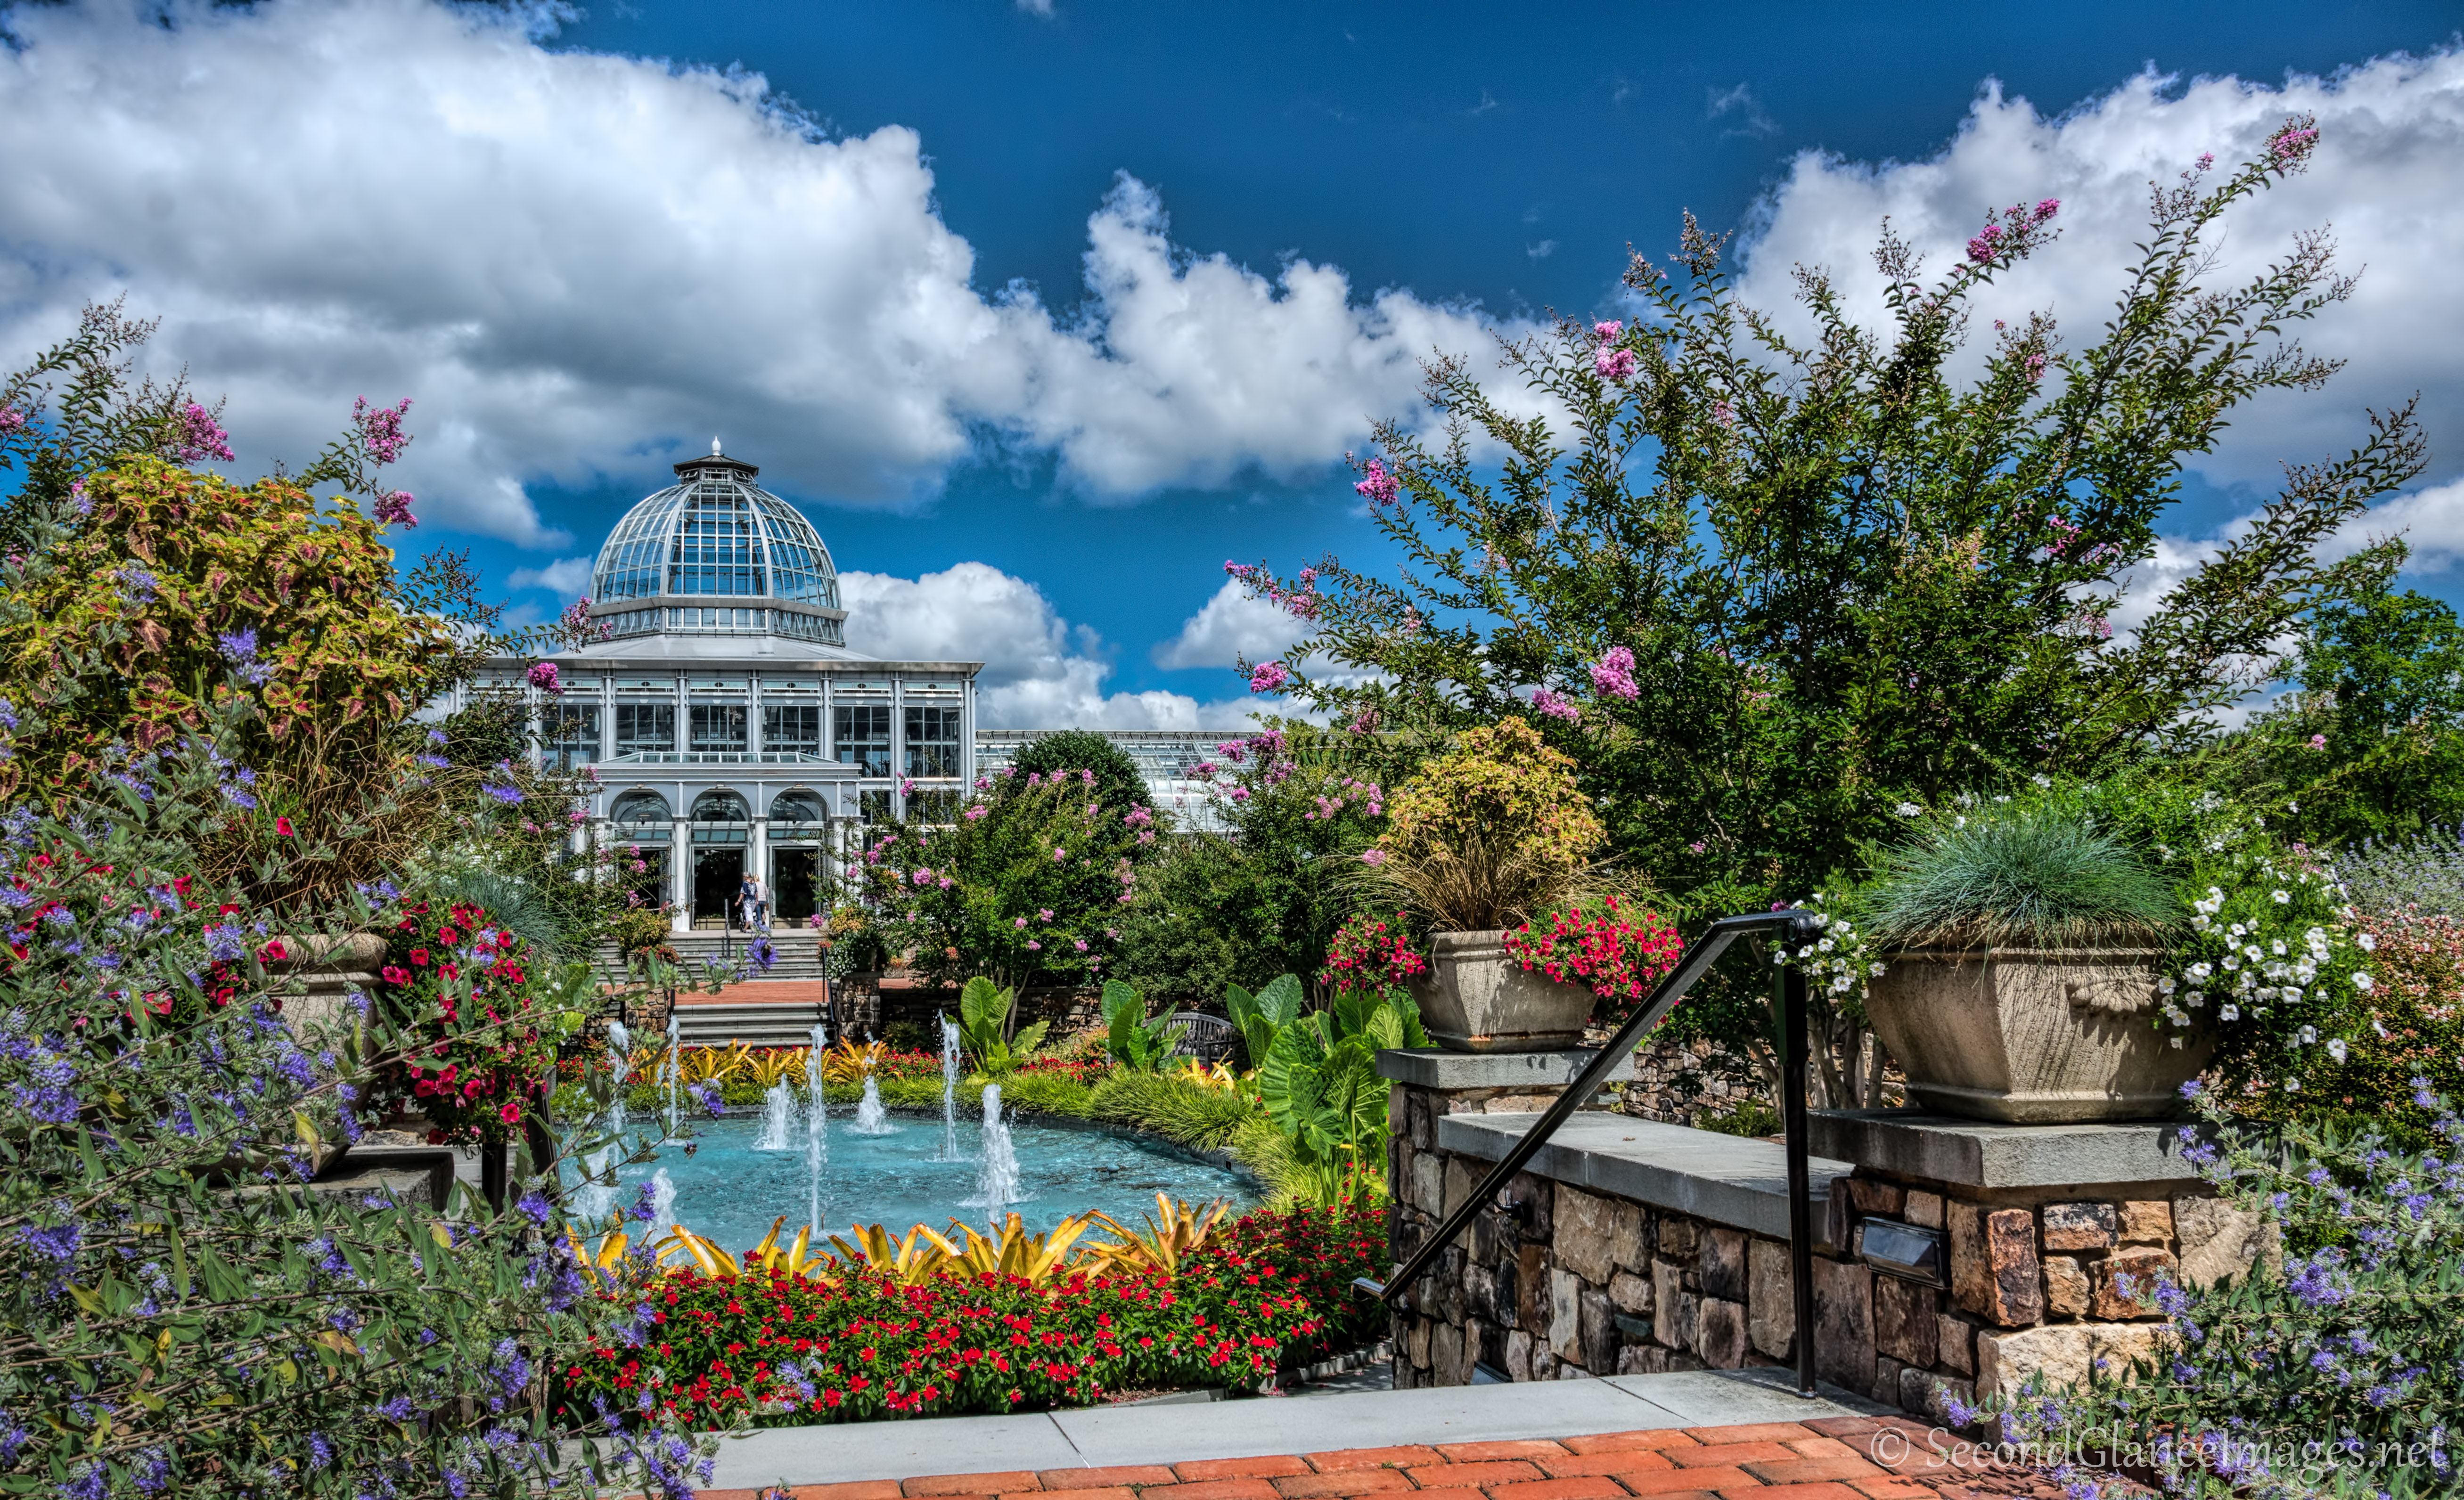 A view of the conservatory … – Second Glance Images